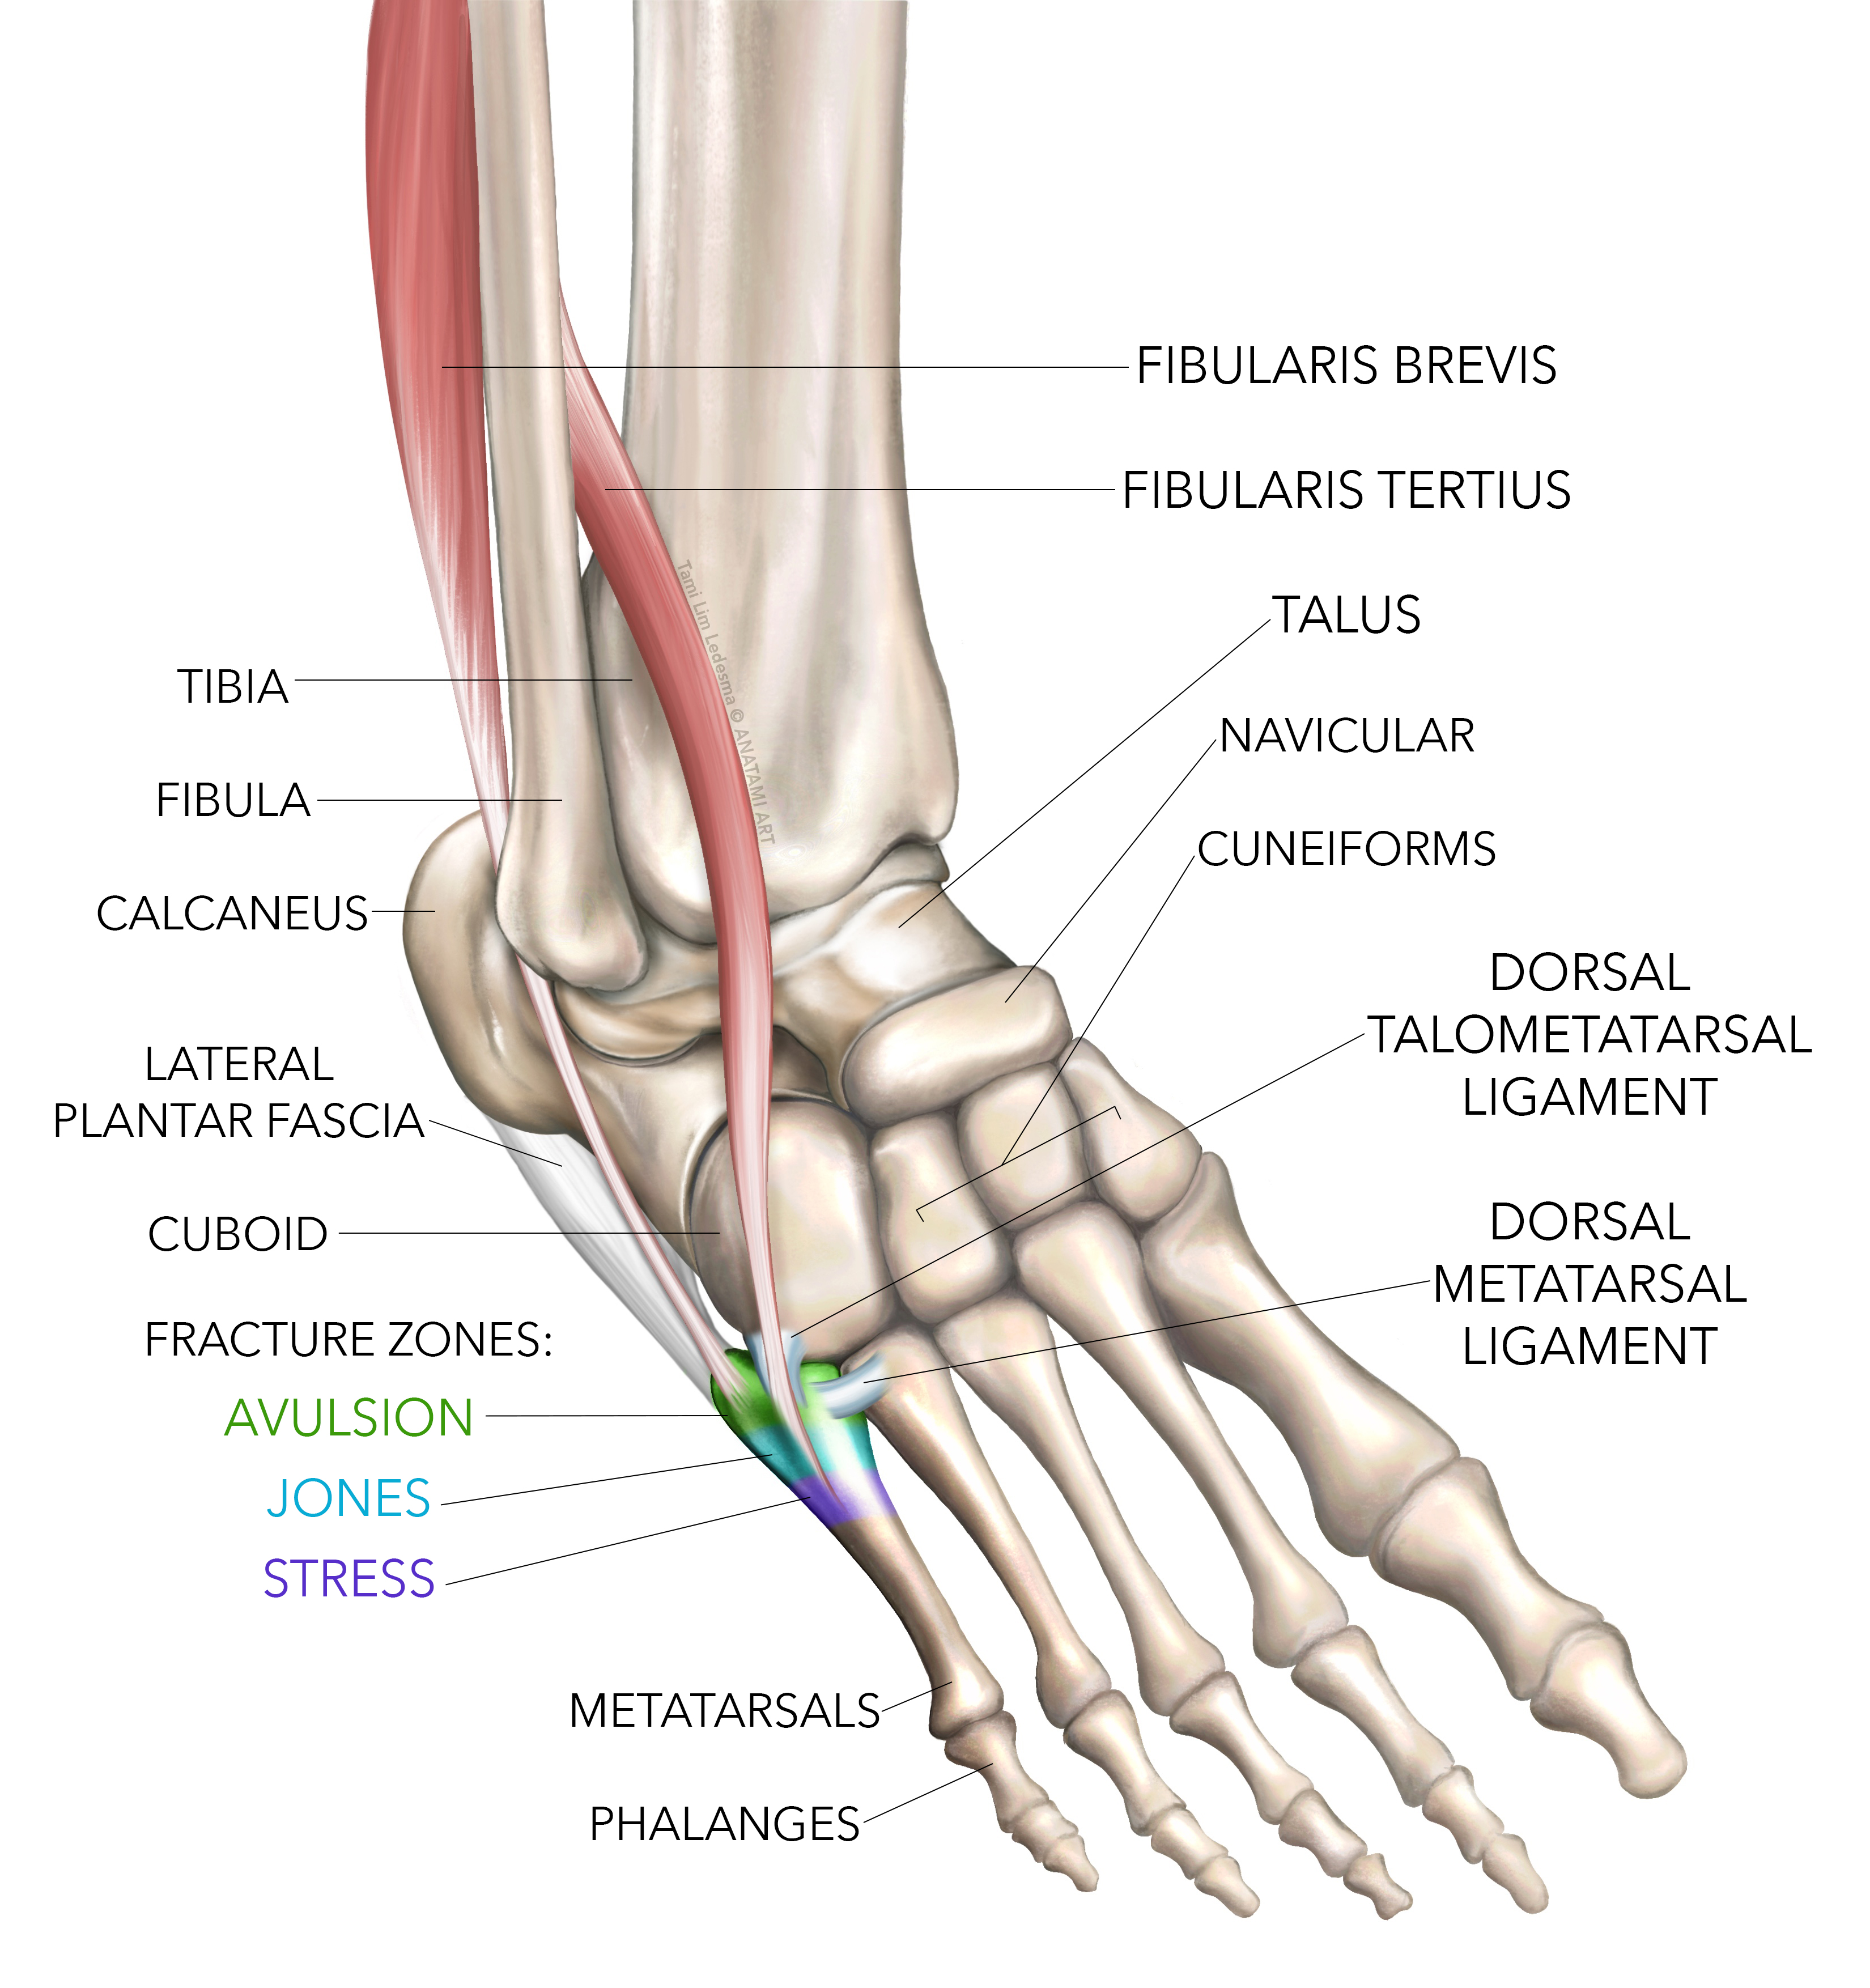 Sports Injury Bulletin - - Fractures of the Proximal 5th Metatarsal in Athletes